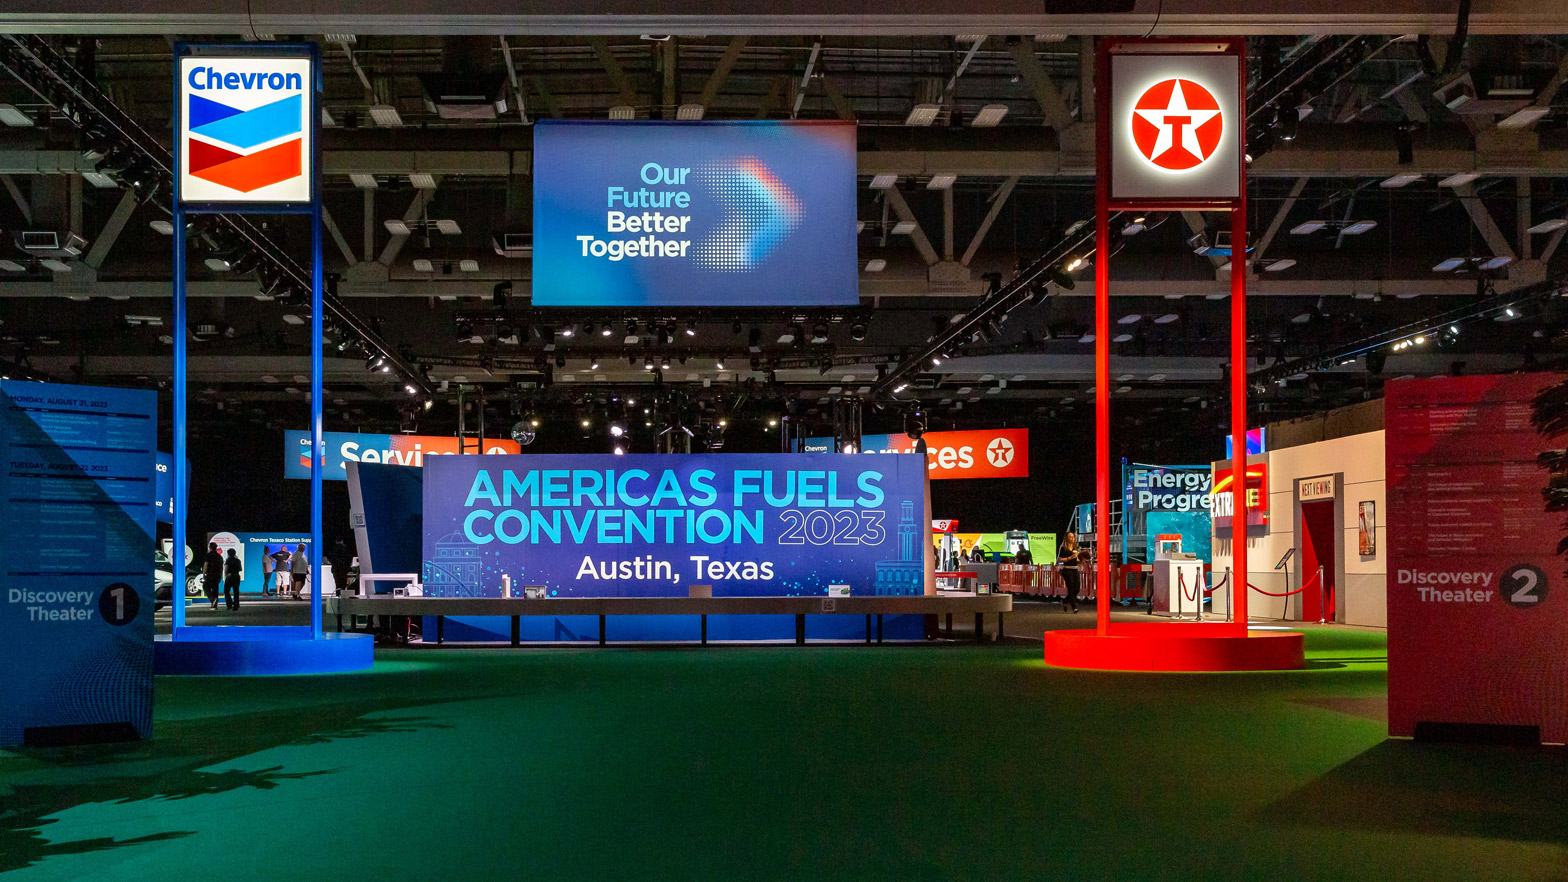 Chevron and Texaco display at Americas Fuels Convention